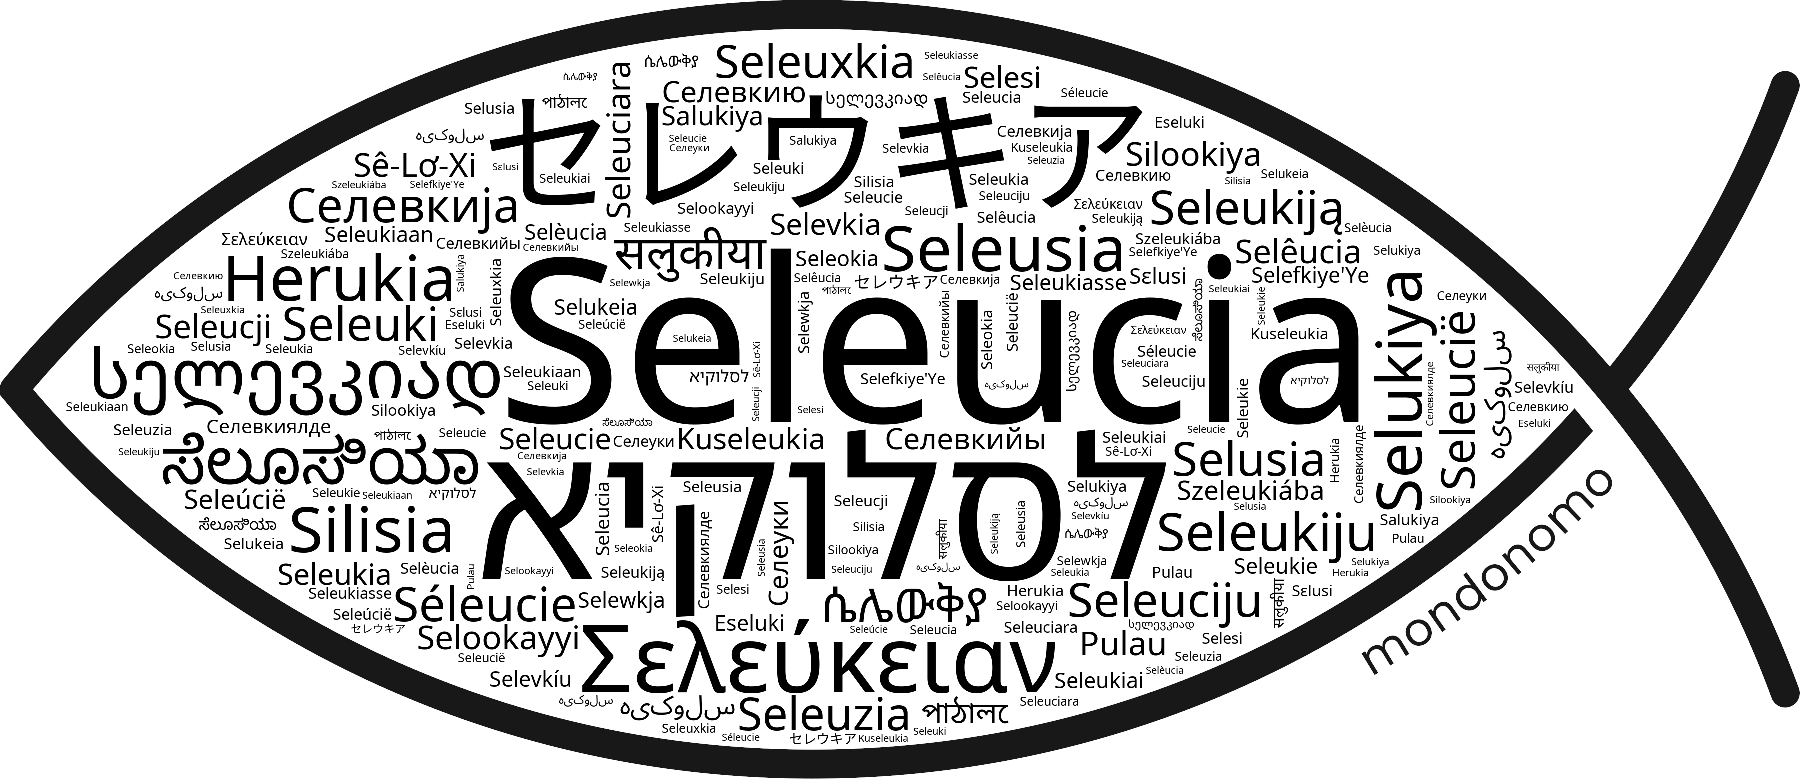 Name Seleucia in the world's Bibles